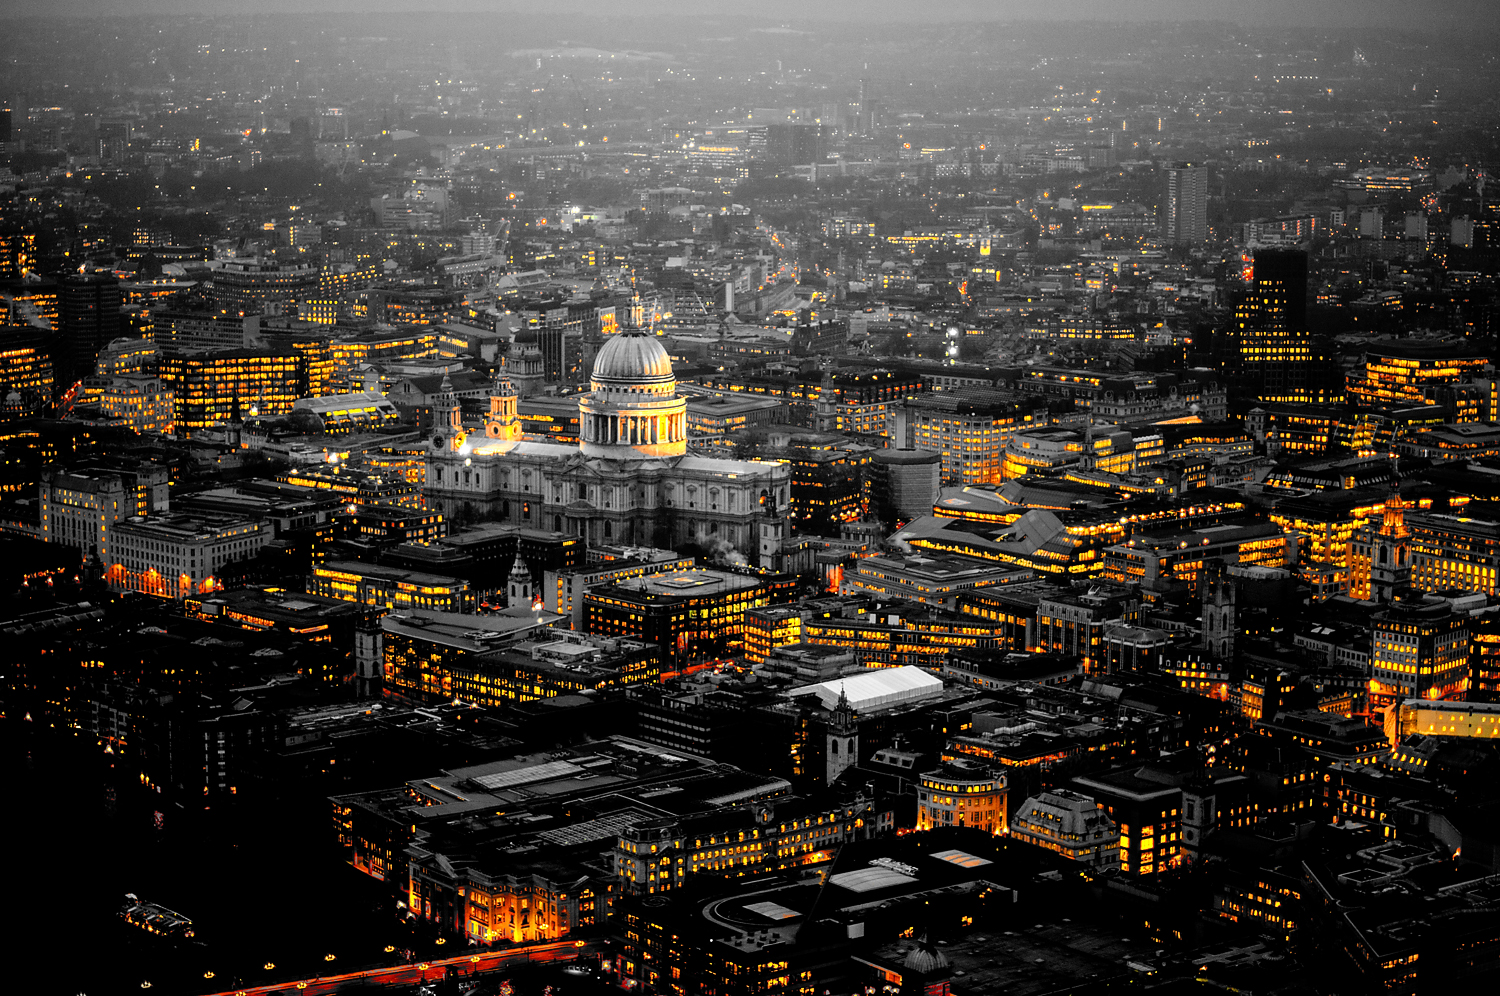 St Paul’s Cathedral from Above